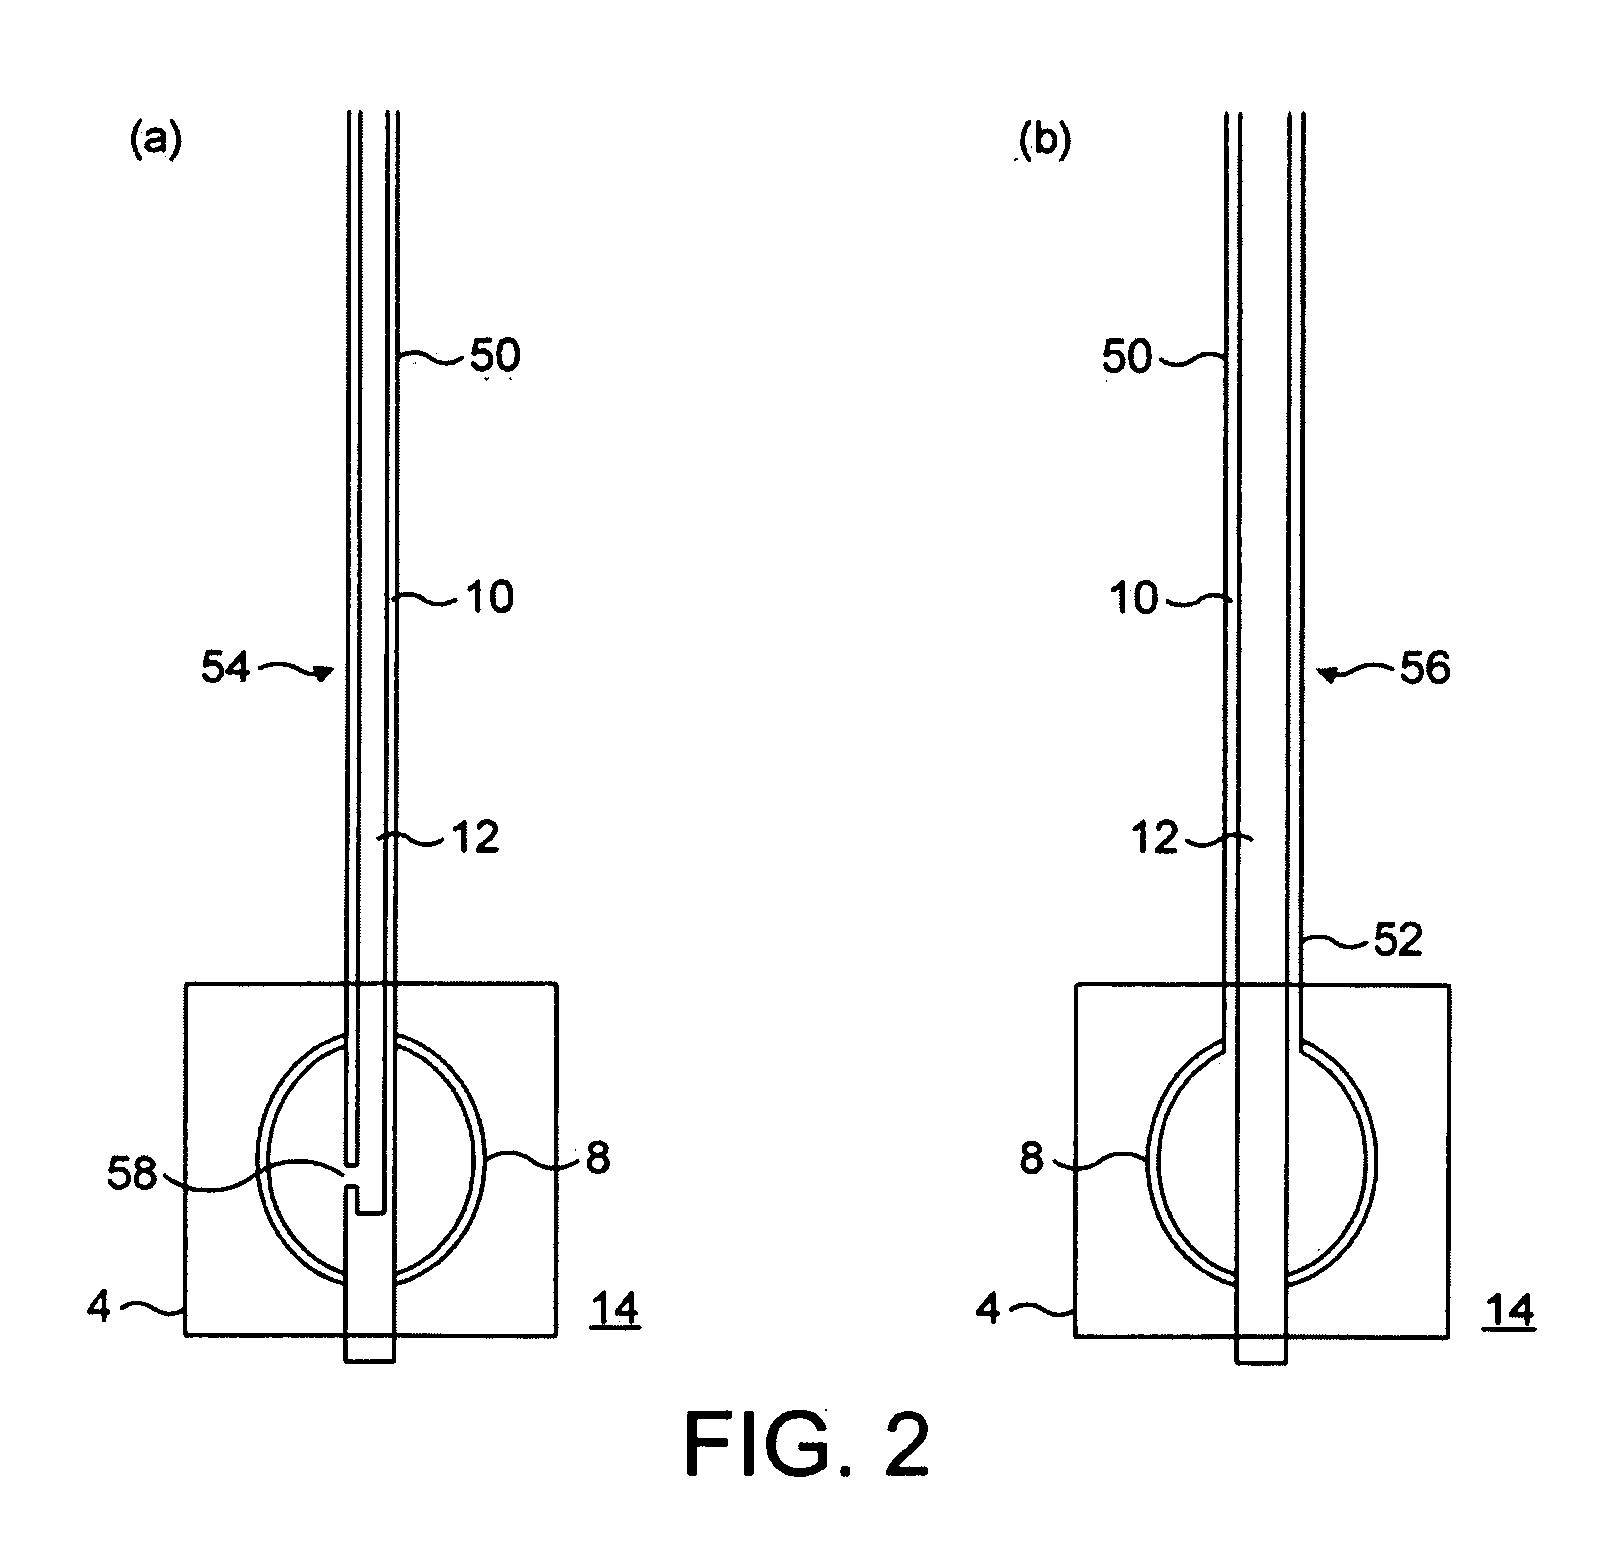 Energy Harvester for an Implant Device